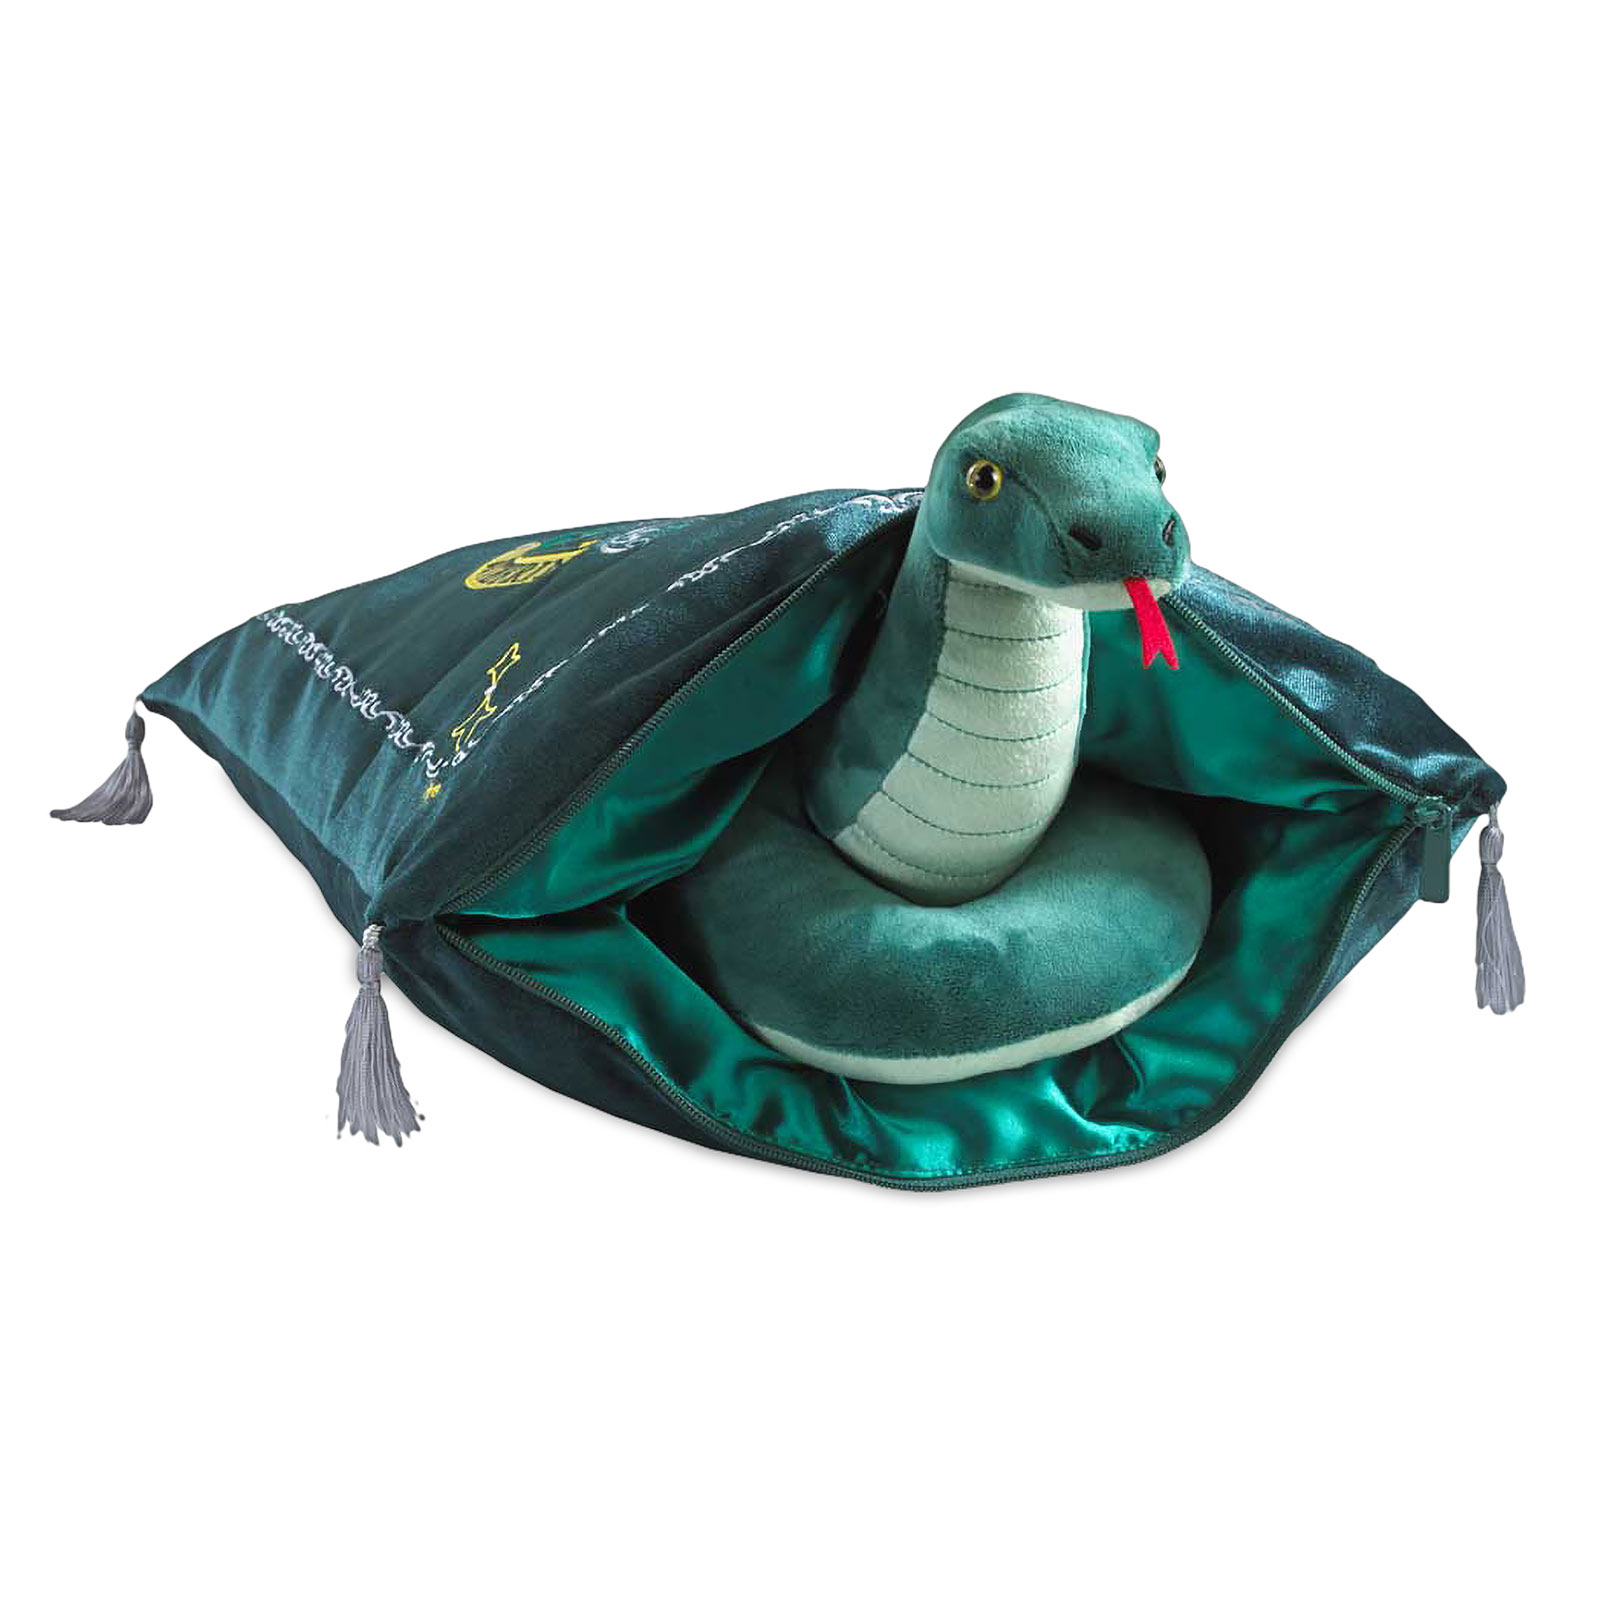 Harry Potter - Slytherin Crest Pillow with Plush Figure